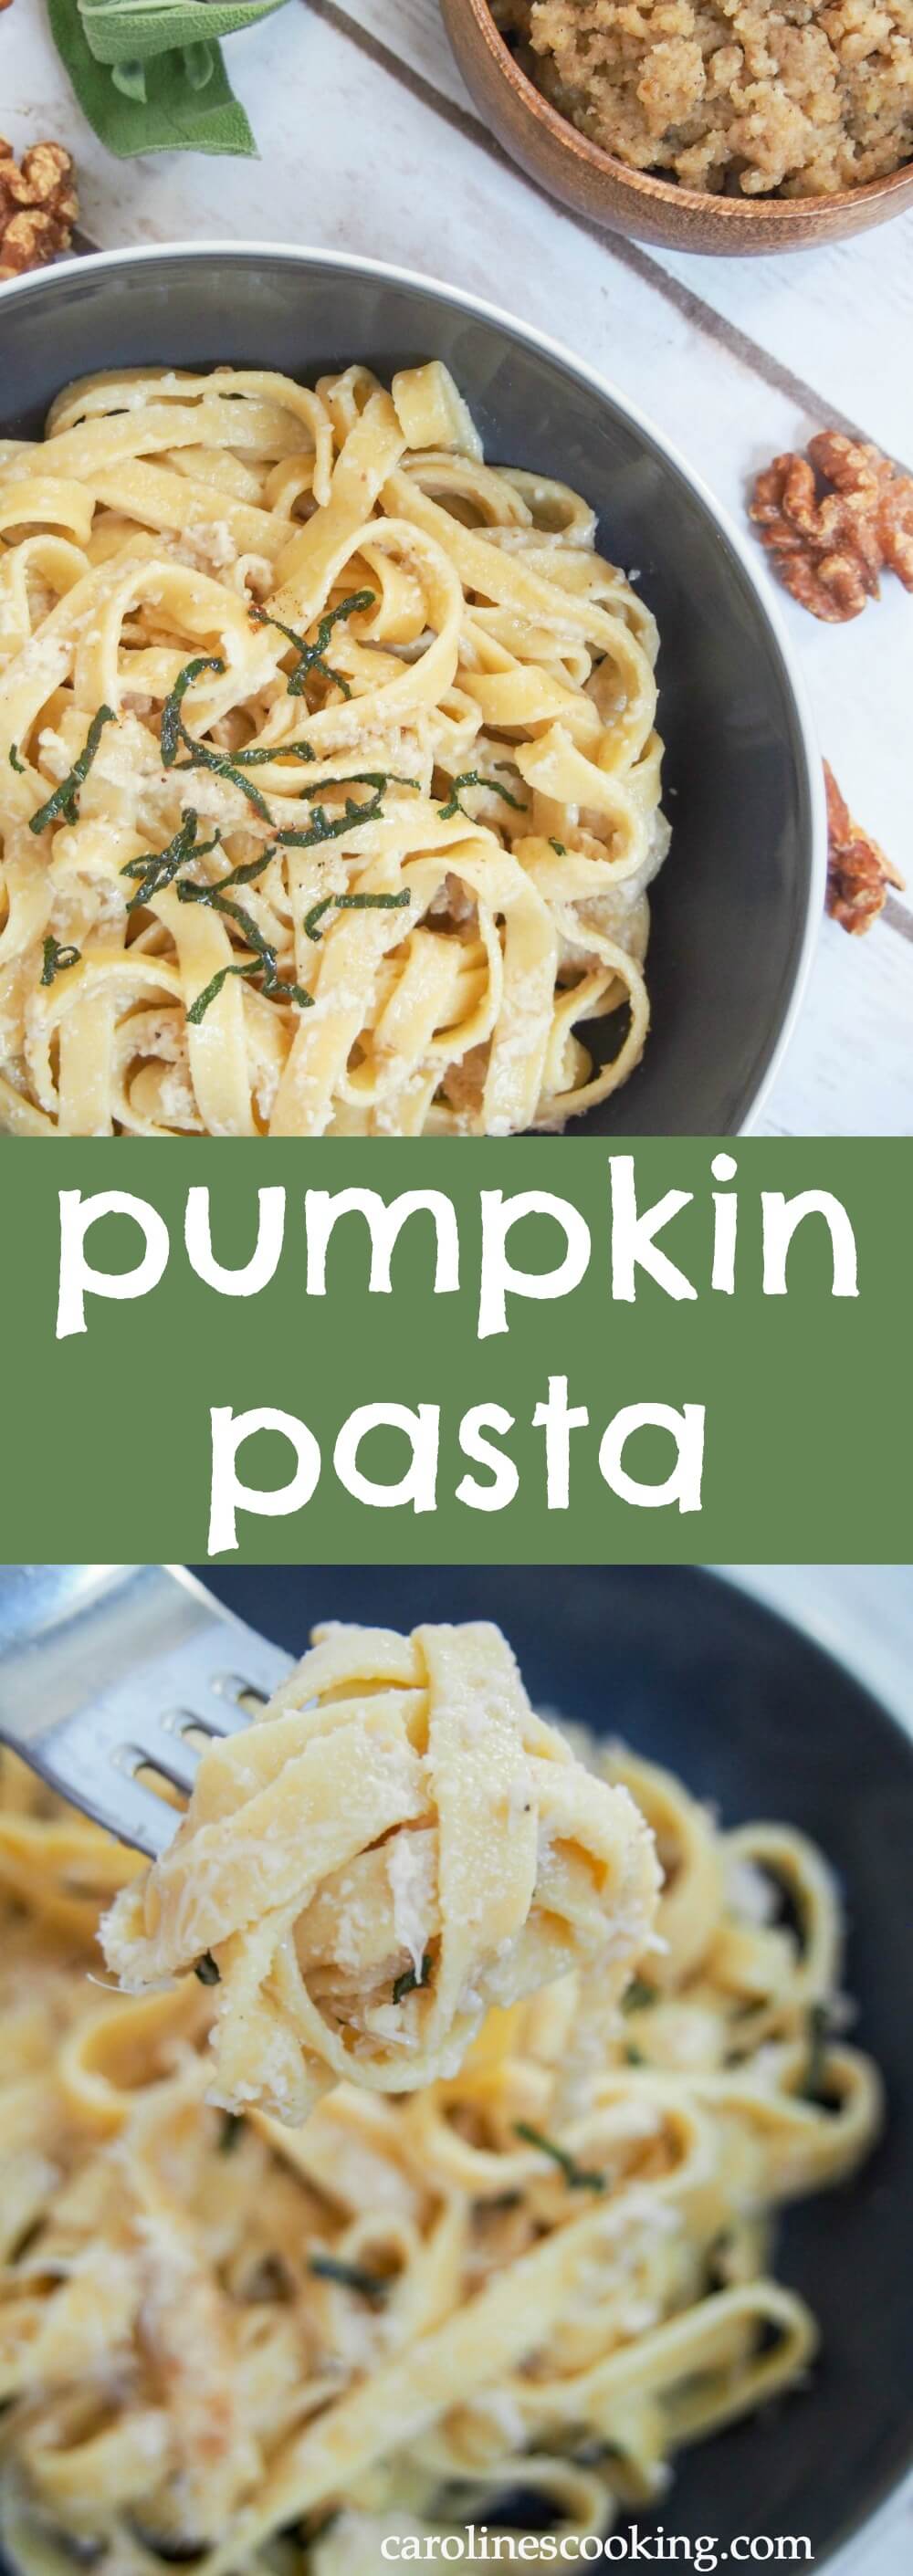 This fresh pumpkin pasta is a delicious way to enjoy a touch of fall in homemade pasta with real pumpkin in the dough.  If you're a pasta fan, you'll be blown away at how good it can taste.  #homemadepasta #pasta #pumpkin